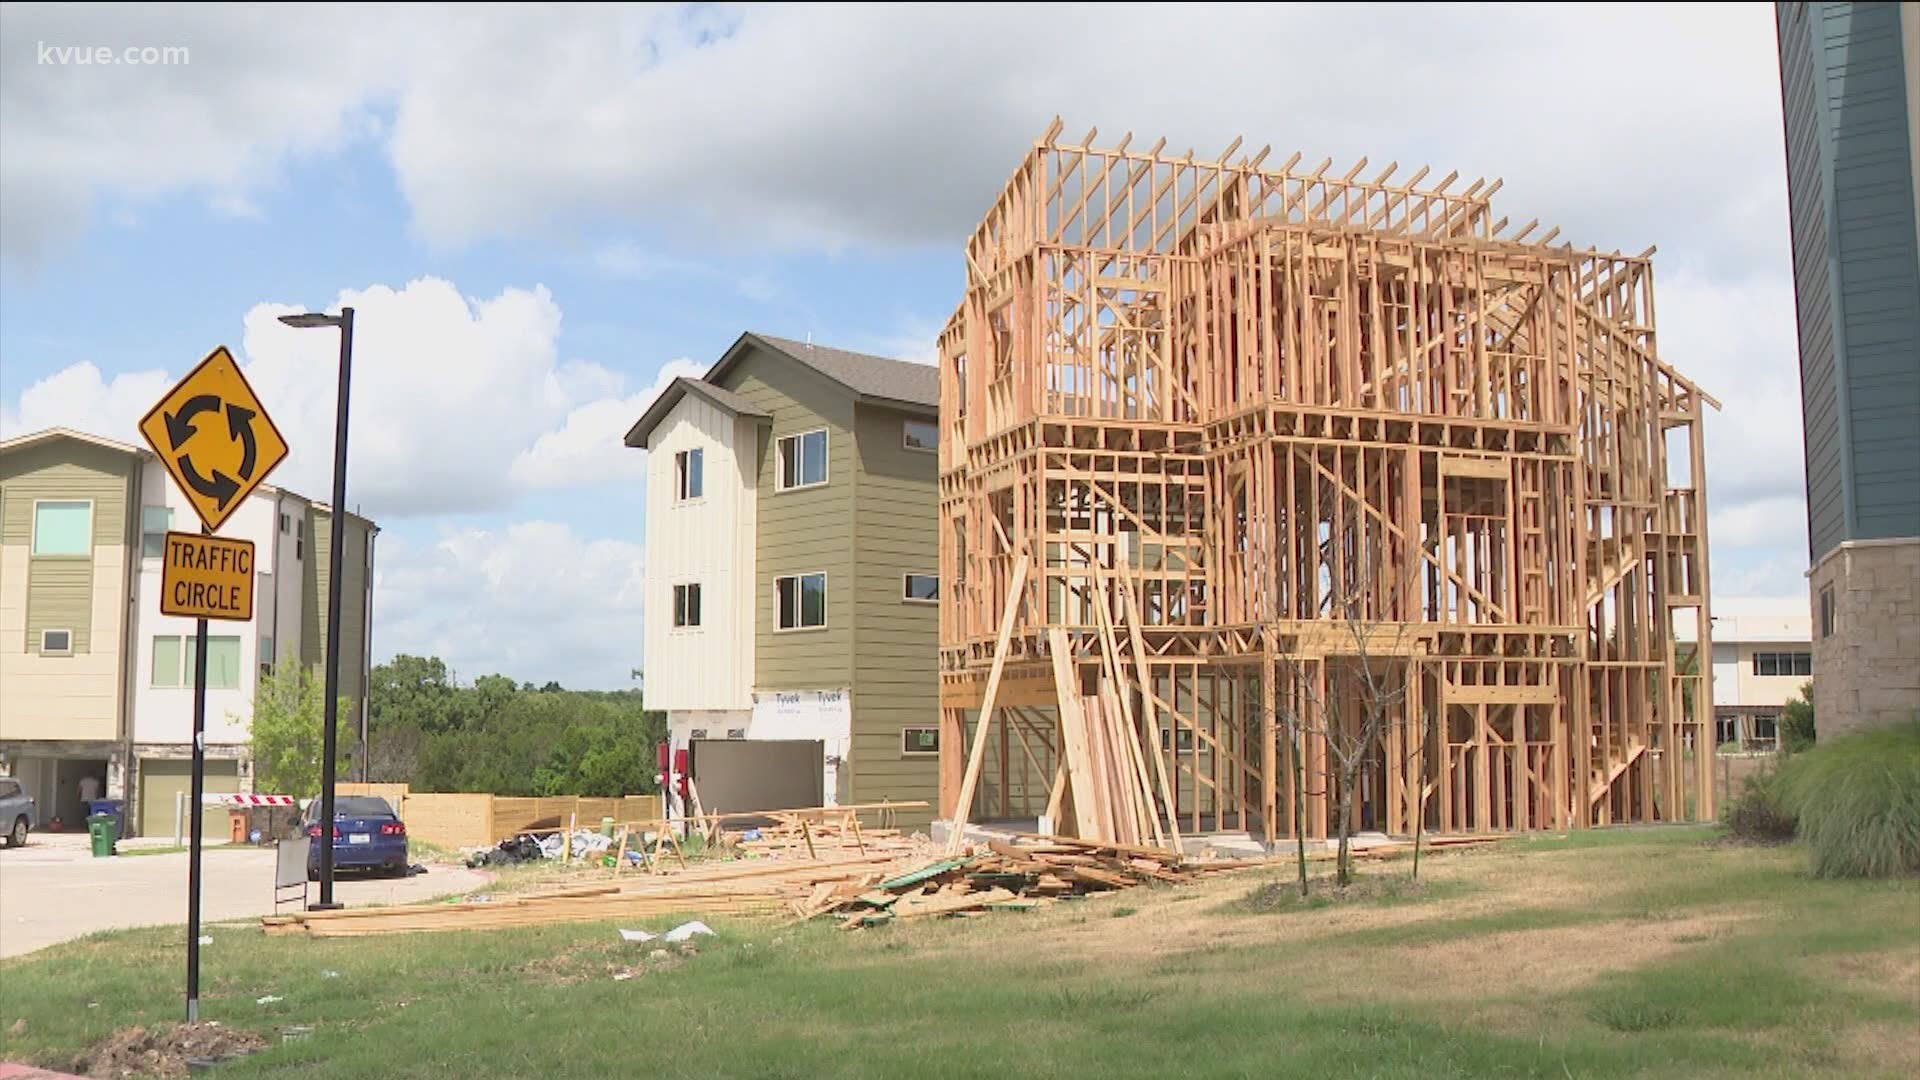 Lumber has been a hot commodity since the price went up and now areas like Hays County are seeing more and more construction site thefts.